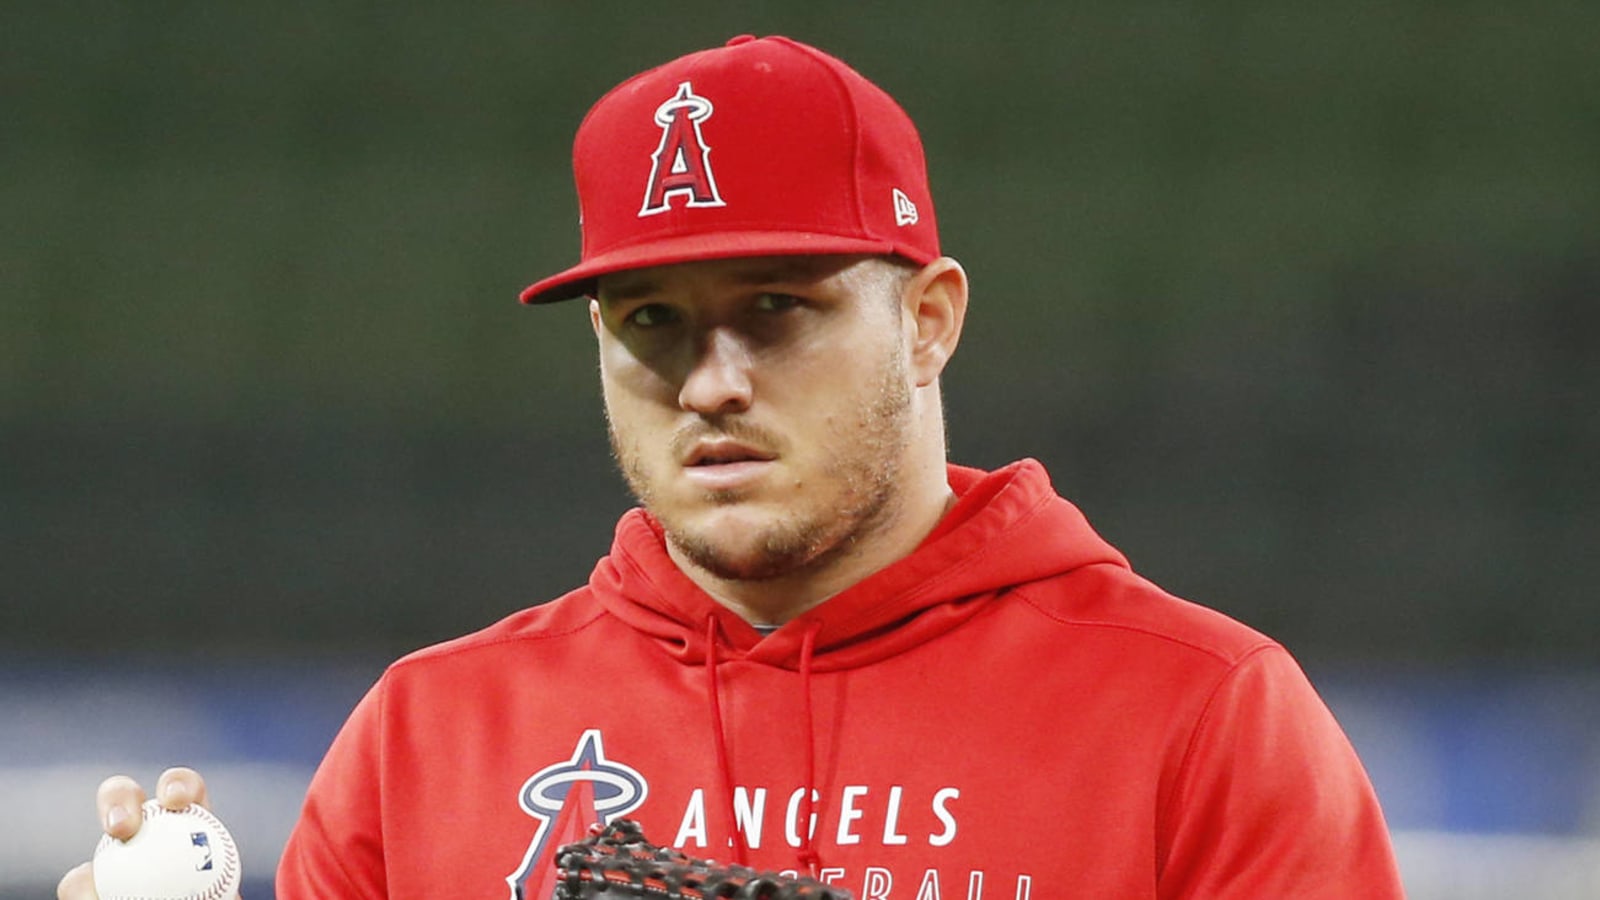 Mike Trout: Injury rehab 'going good', says he 'feels great'